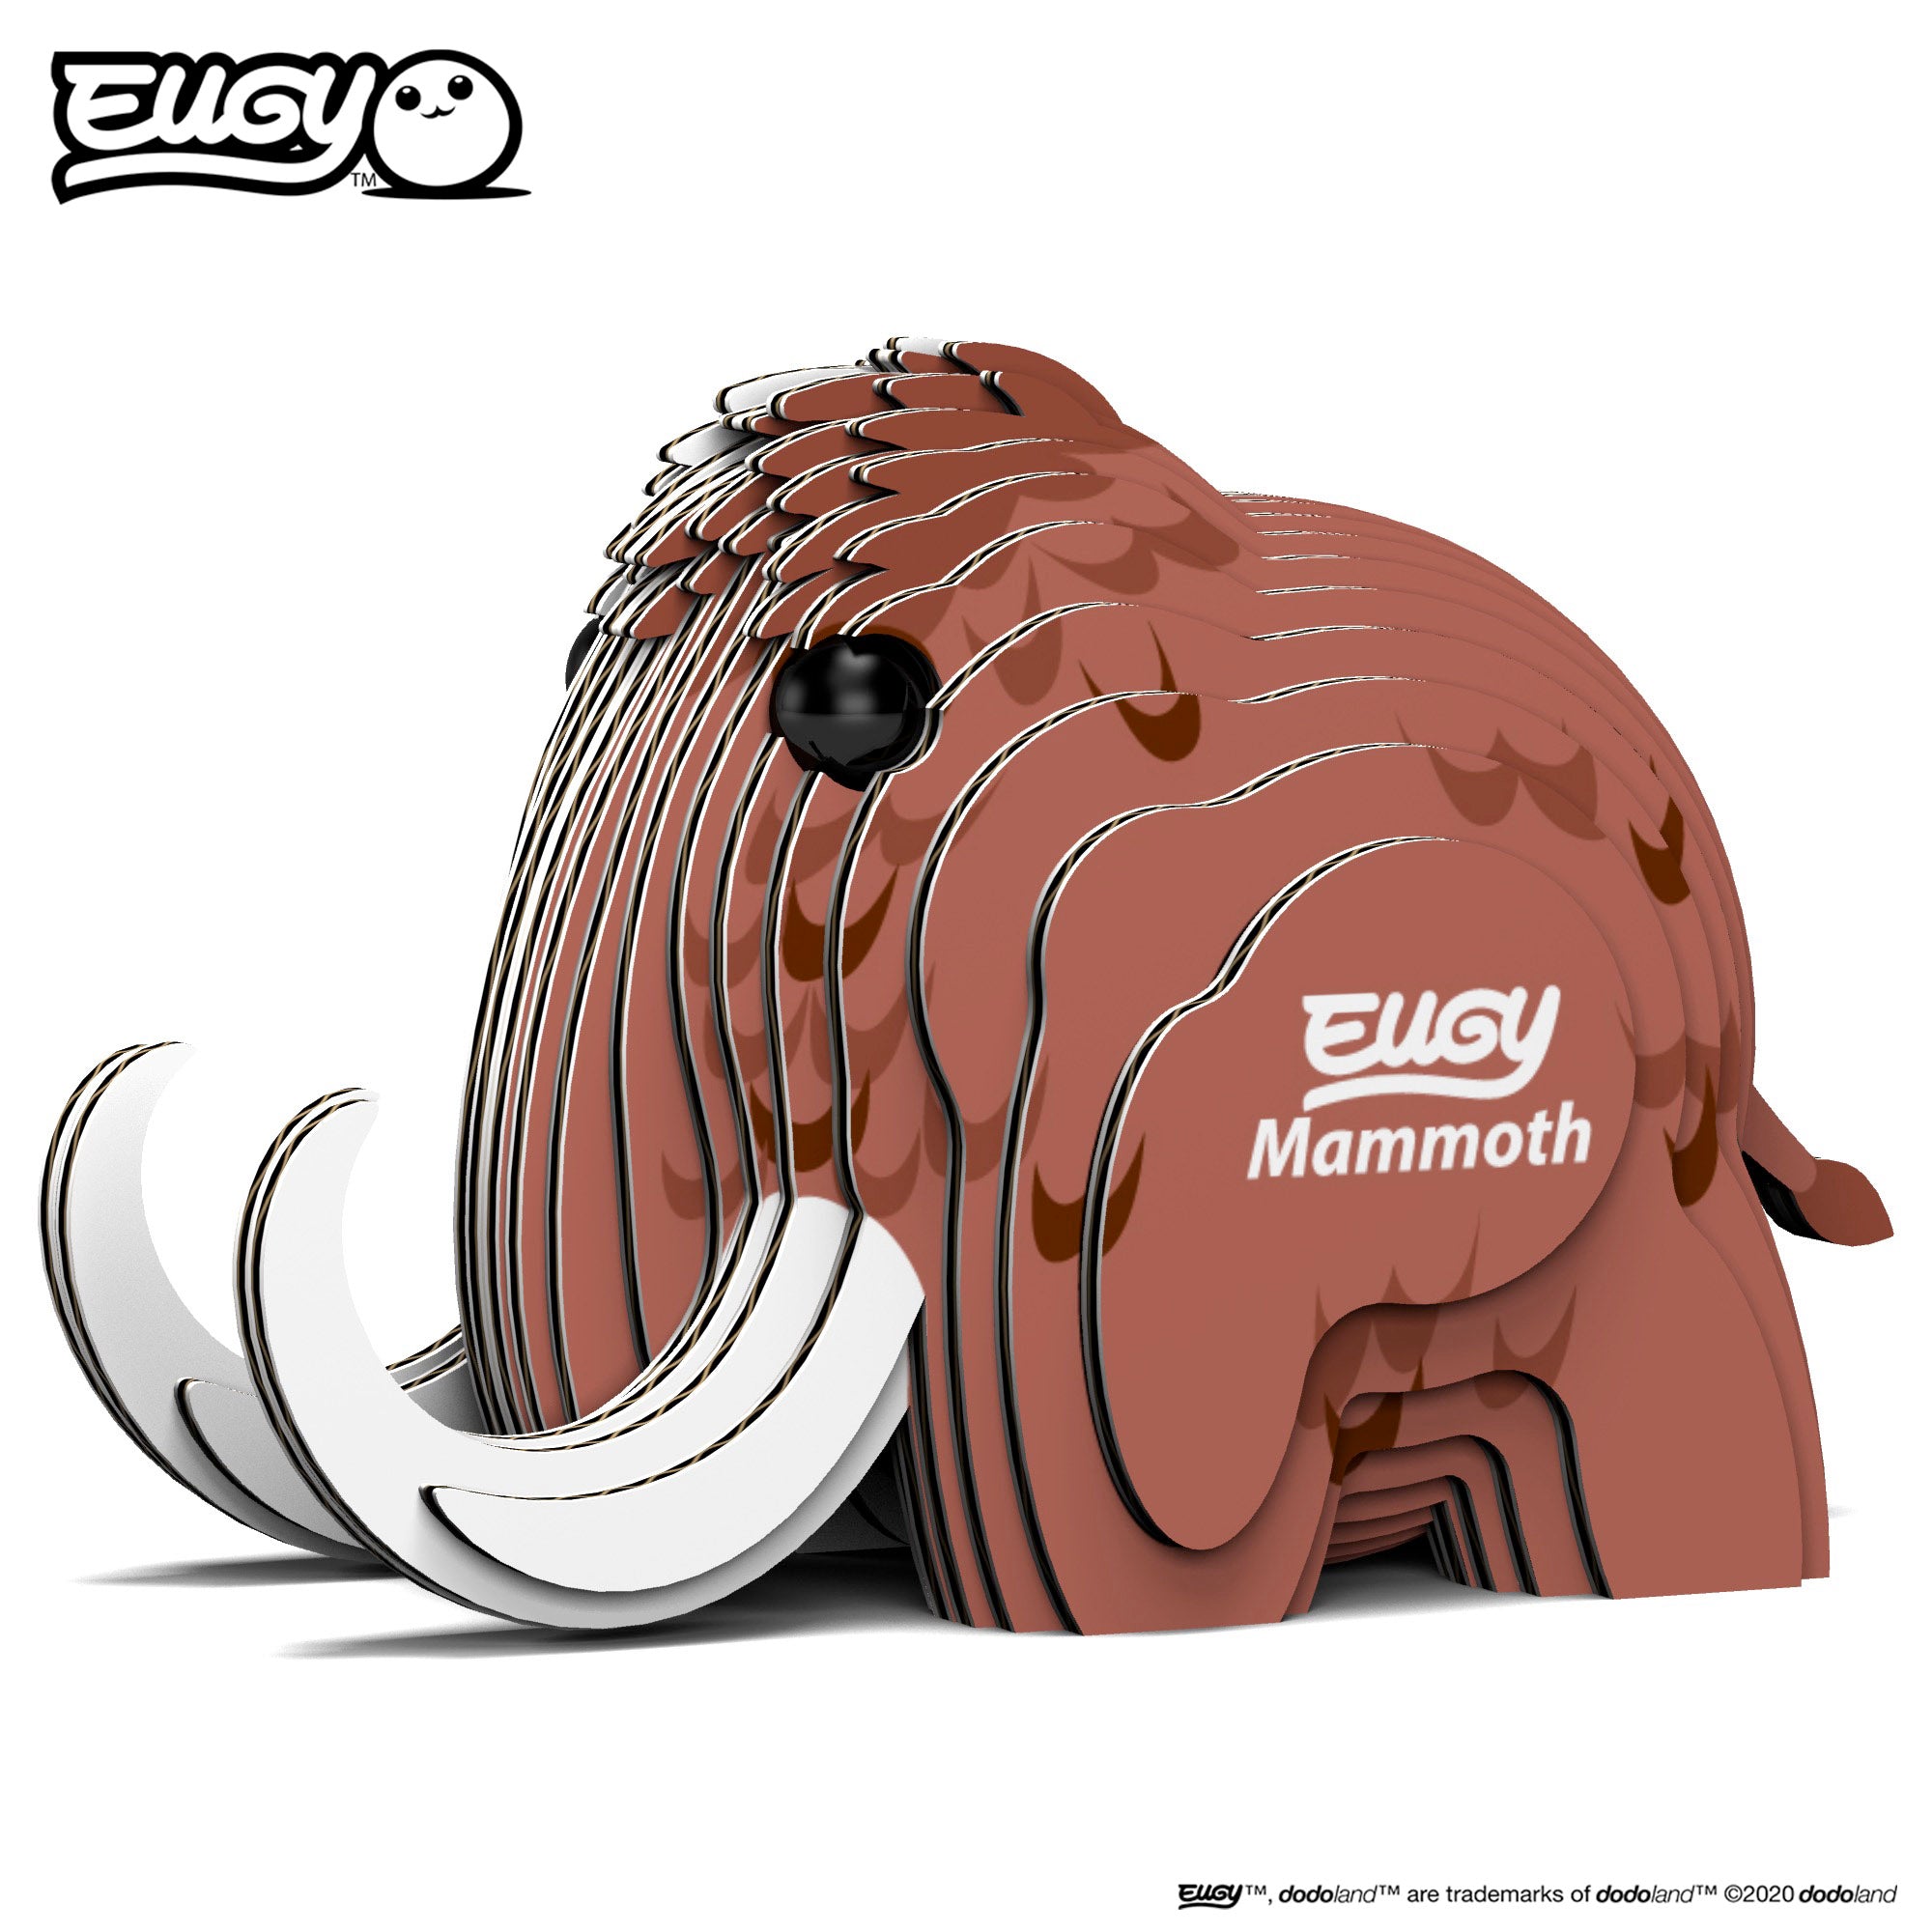 Image of an EUGY Mammoth, facing slightly left and against a white background